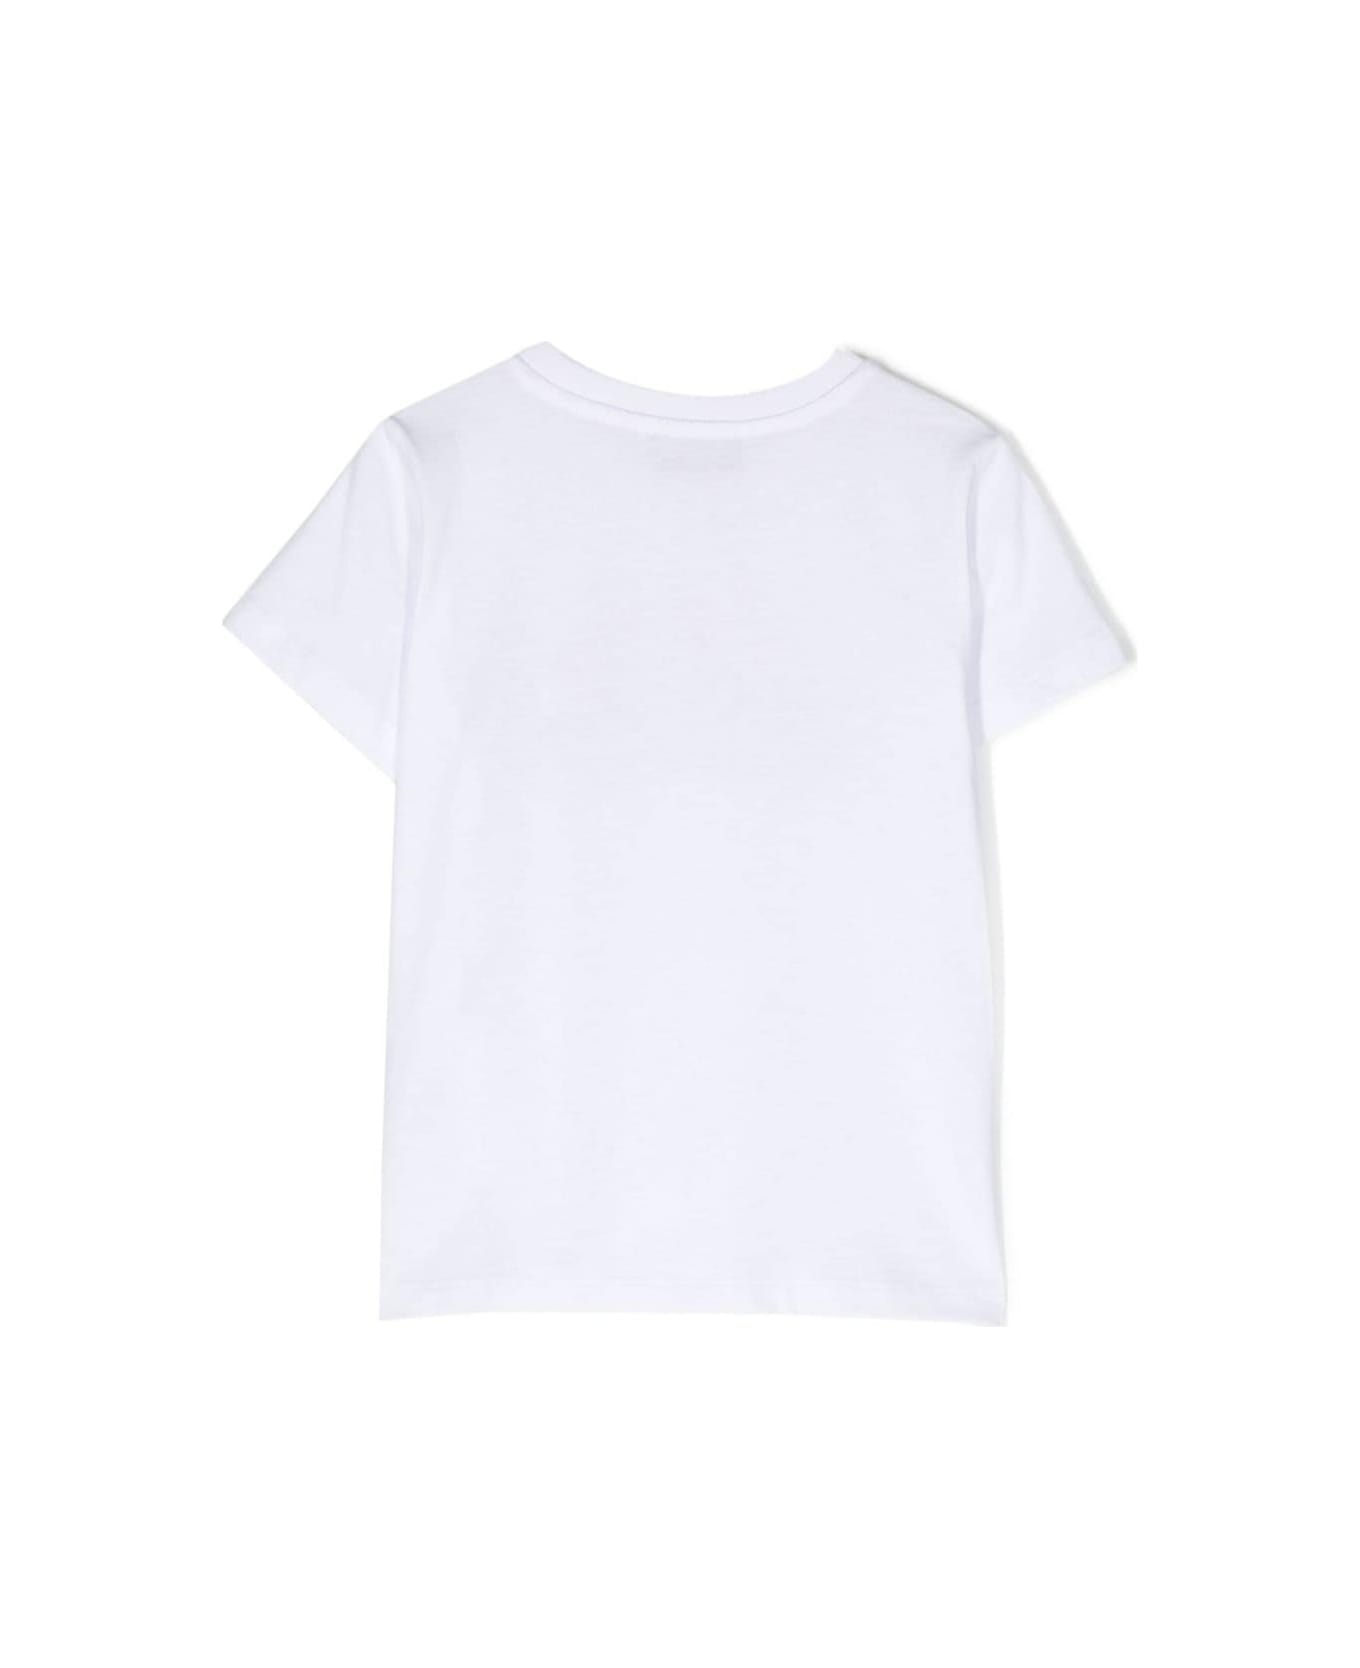 Moschino White T-shirt With Logo And Teddy Bear In Cotton Boy - White